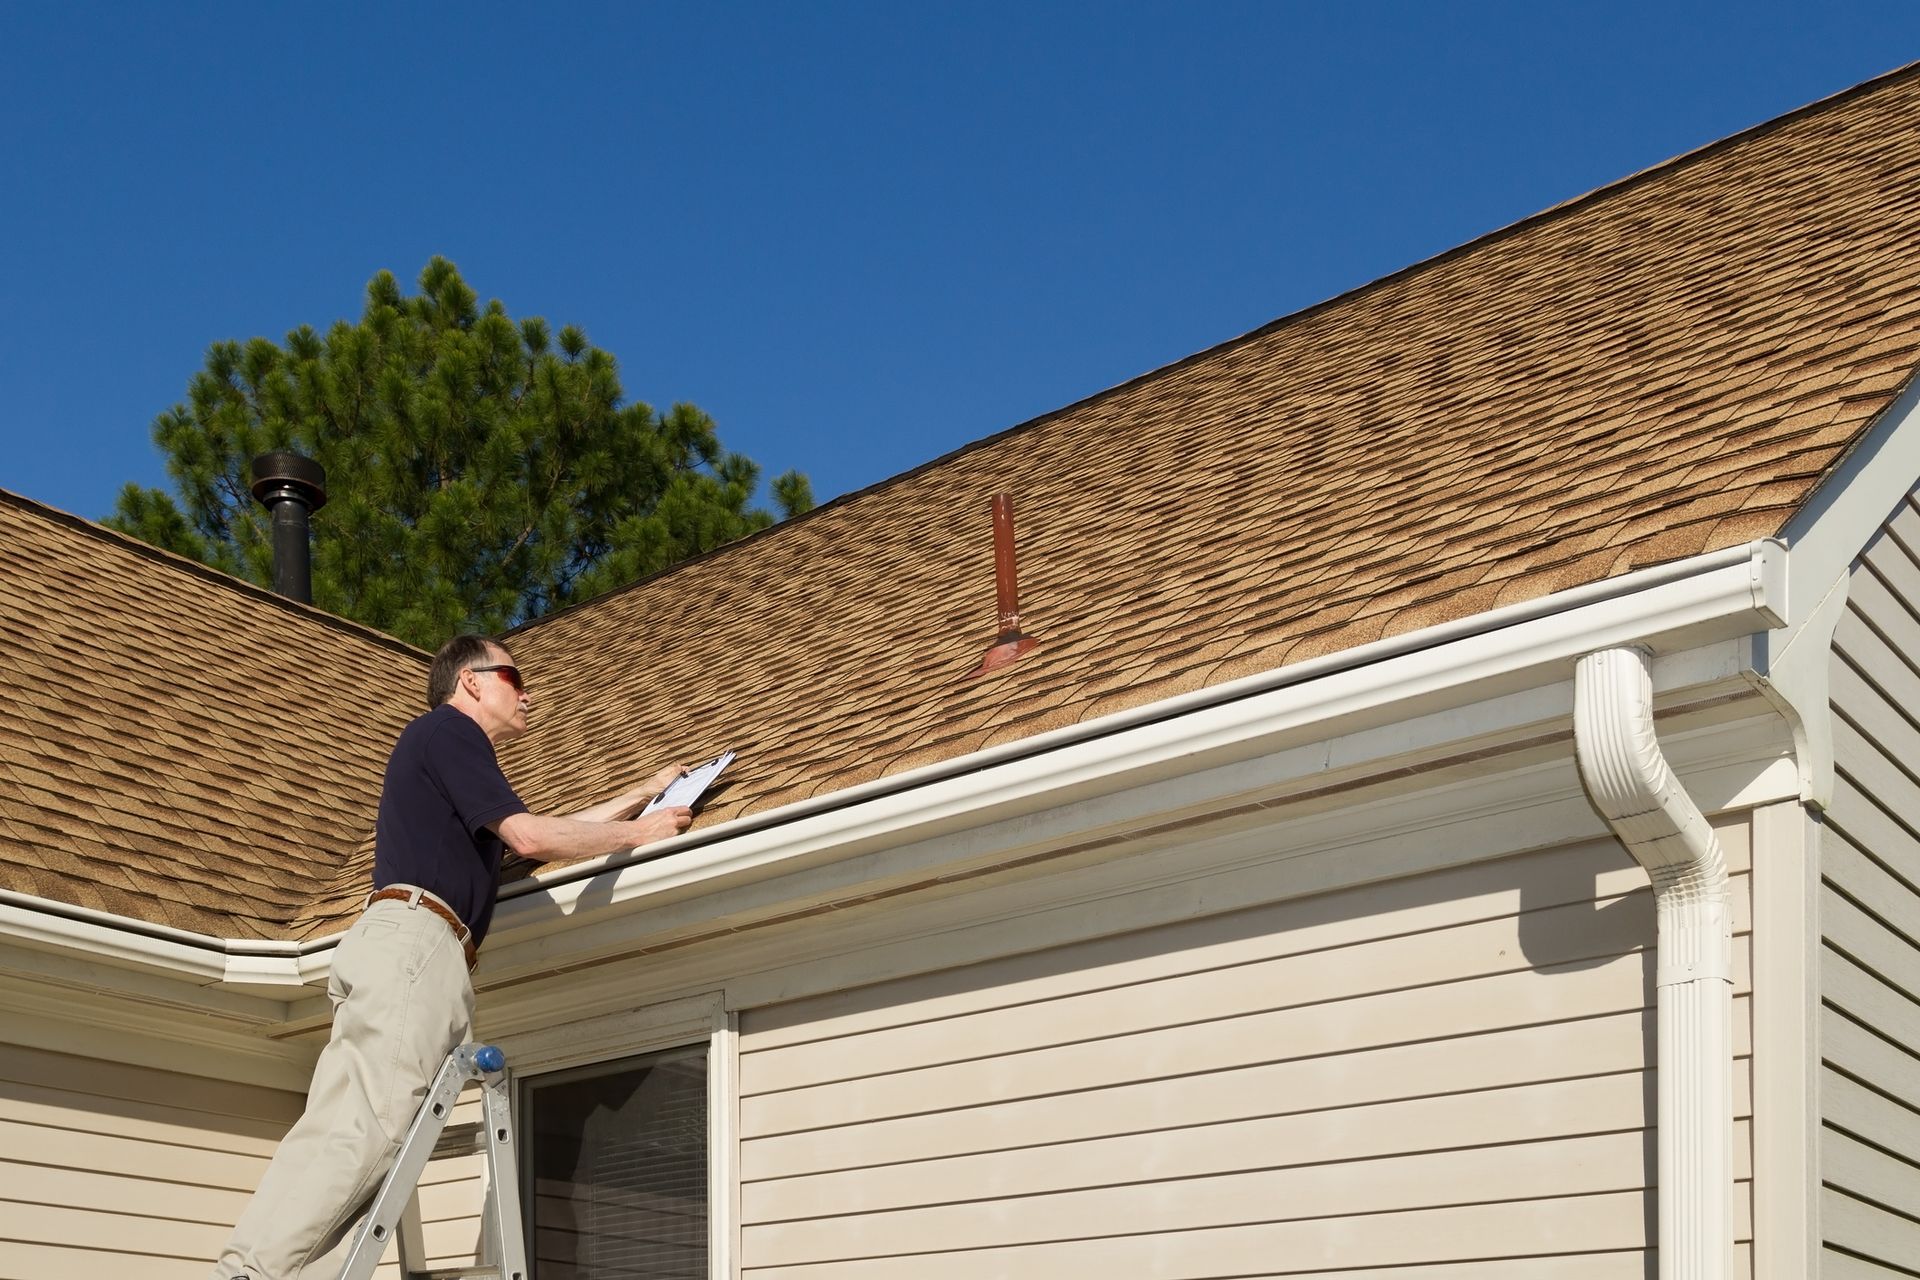 ACR technician examines a residential roof.